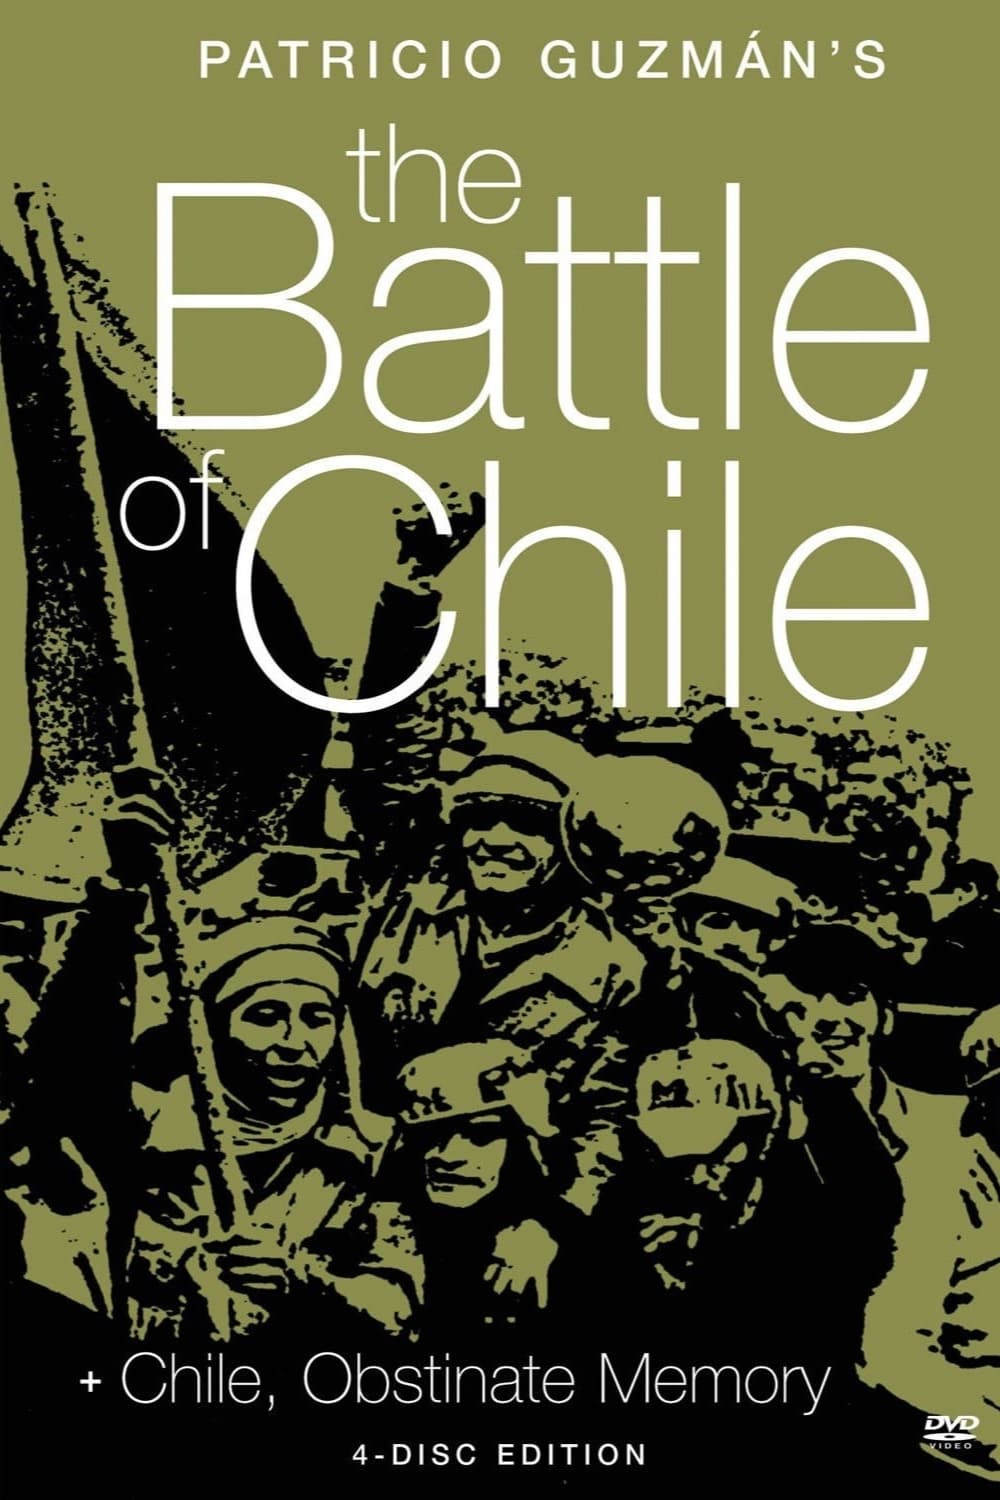 The battle of Chile